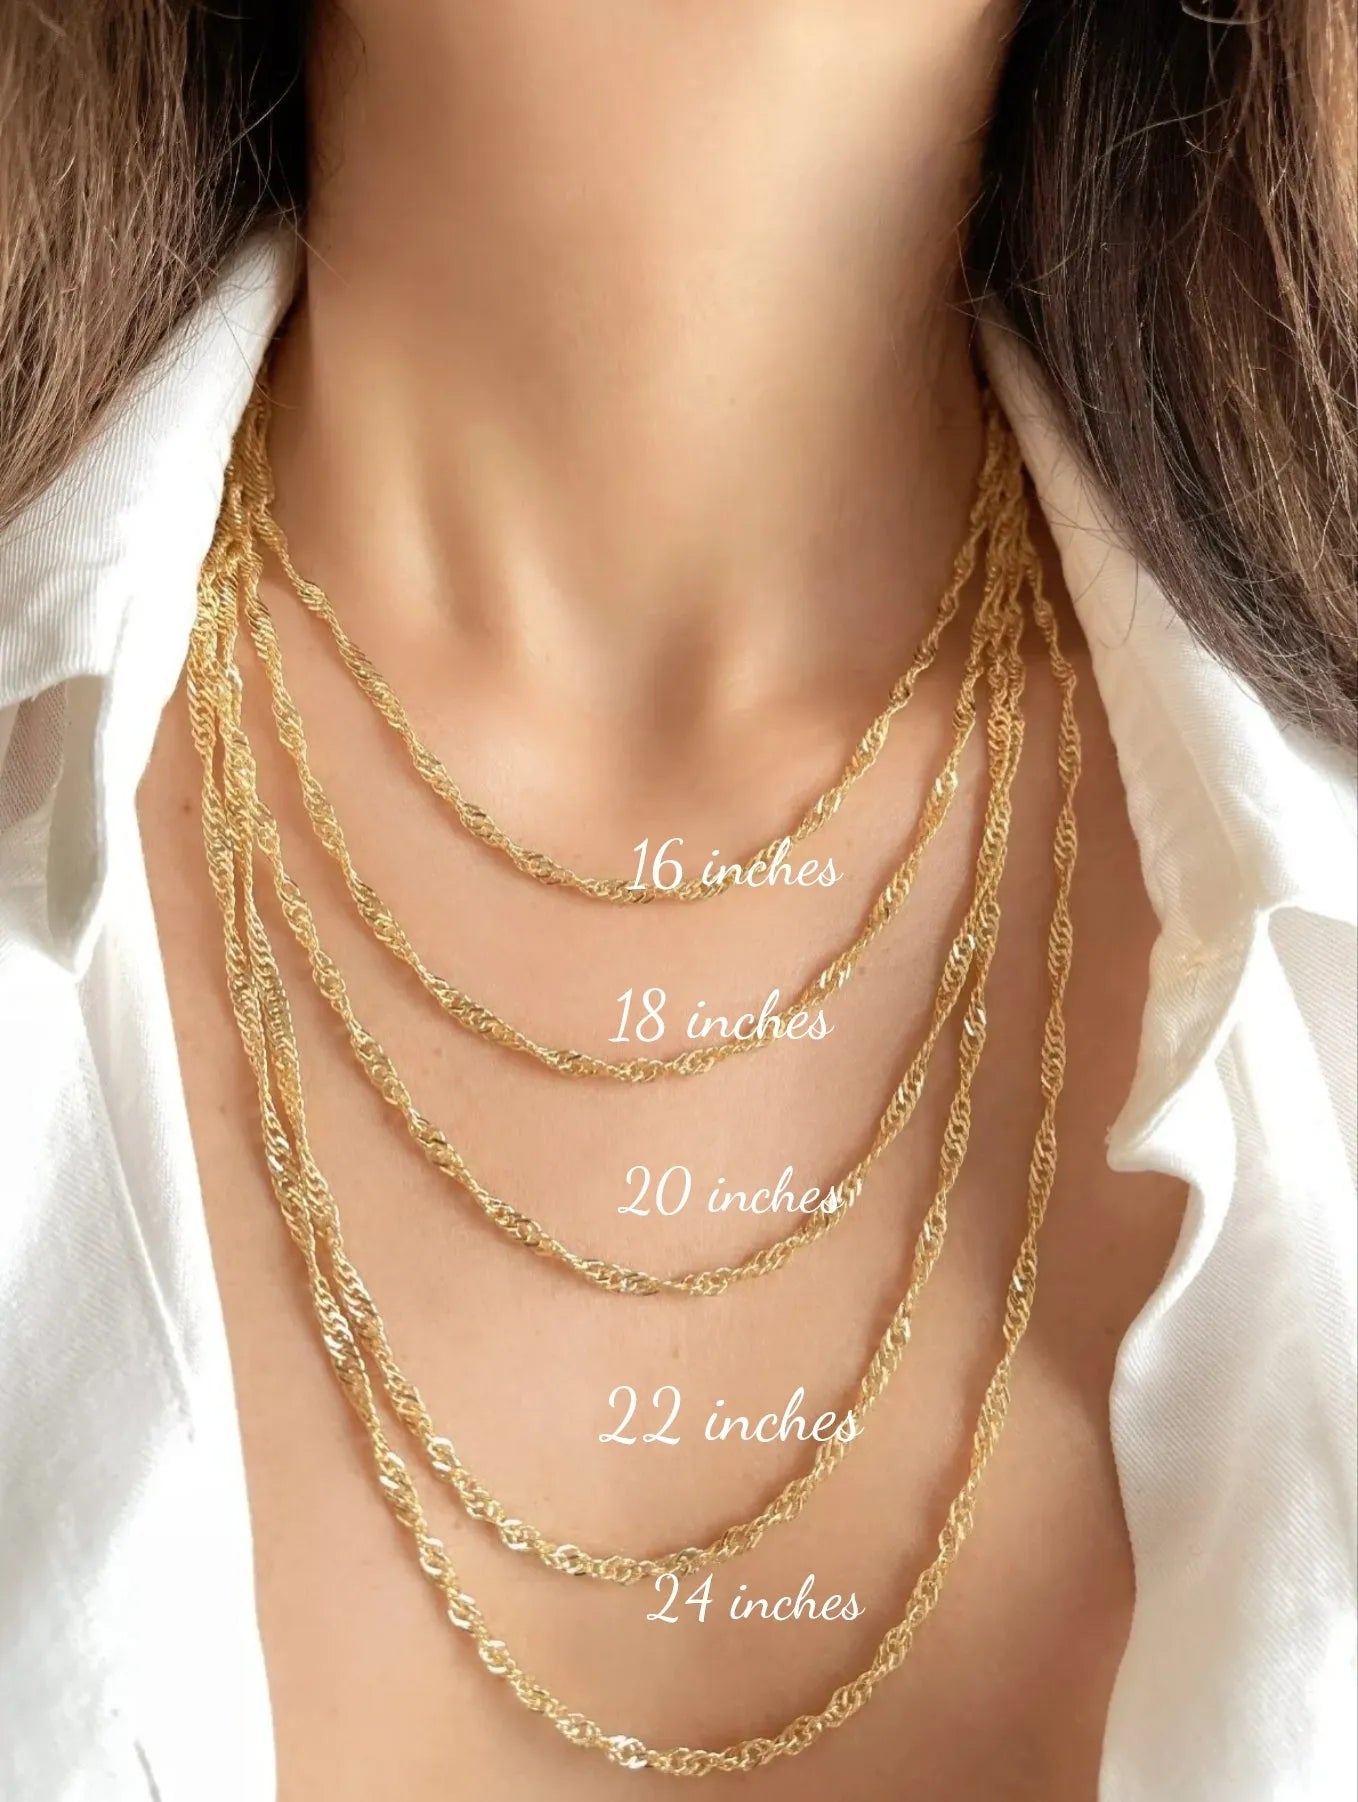 Women wearing different jewelry chain lengths, from shortest to longest: 16 Inches; 18 Inches; 20 Inches; 22 Inches; 24 Inches